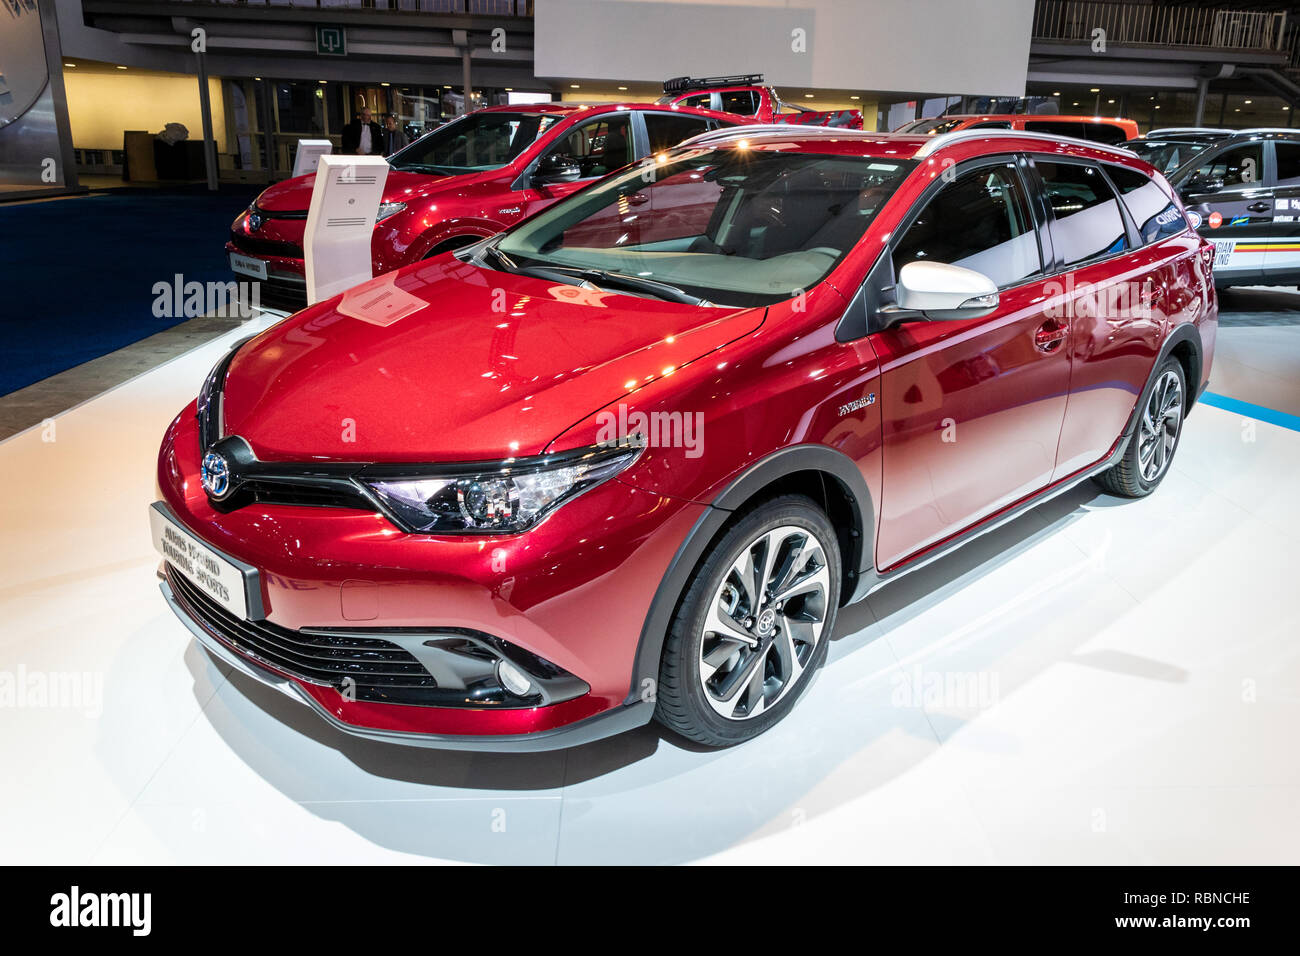 https://c8.alamy.com/comp/RBNCHE/brussels-jan-10-2018-toyota-auris-hybrid-touring-sports-compact-estate-car-showcased-at-the-brussels-expo-autosalon-motor-show-RBNCHE.jpg